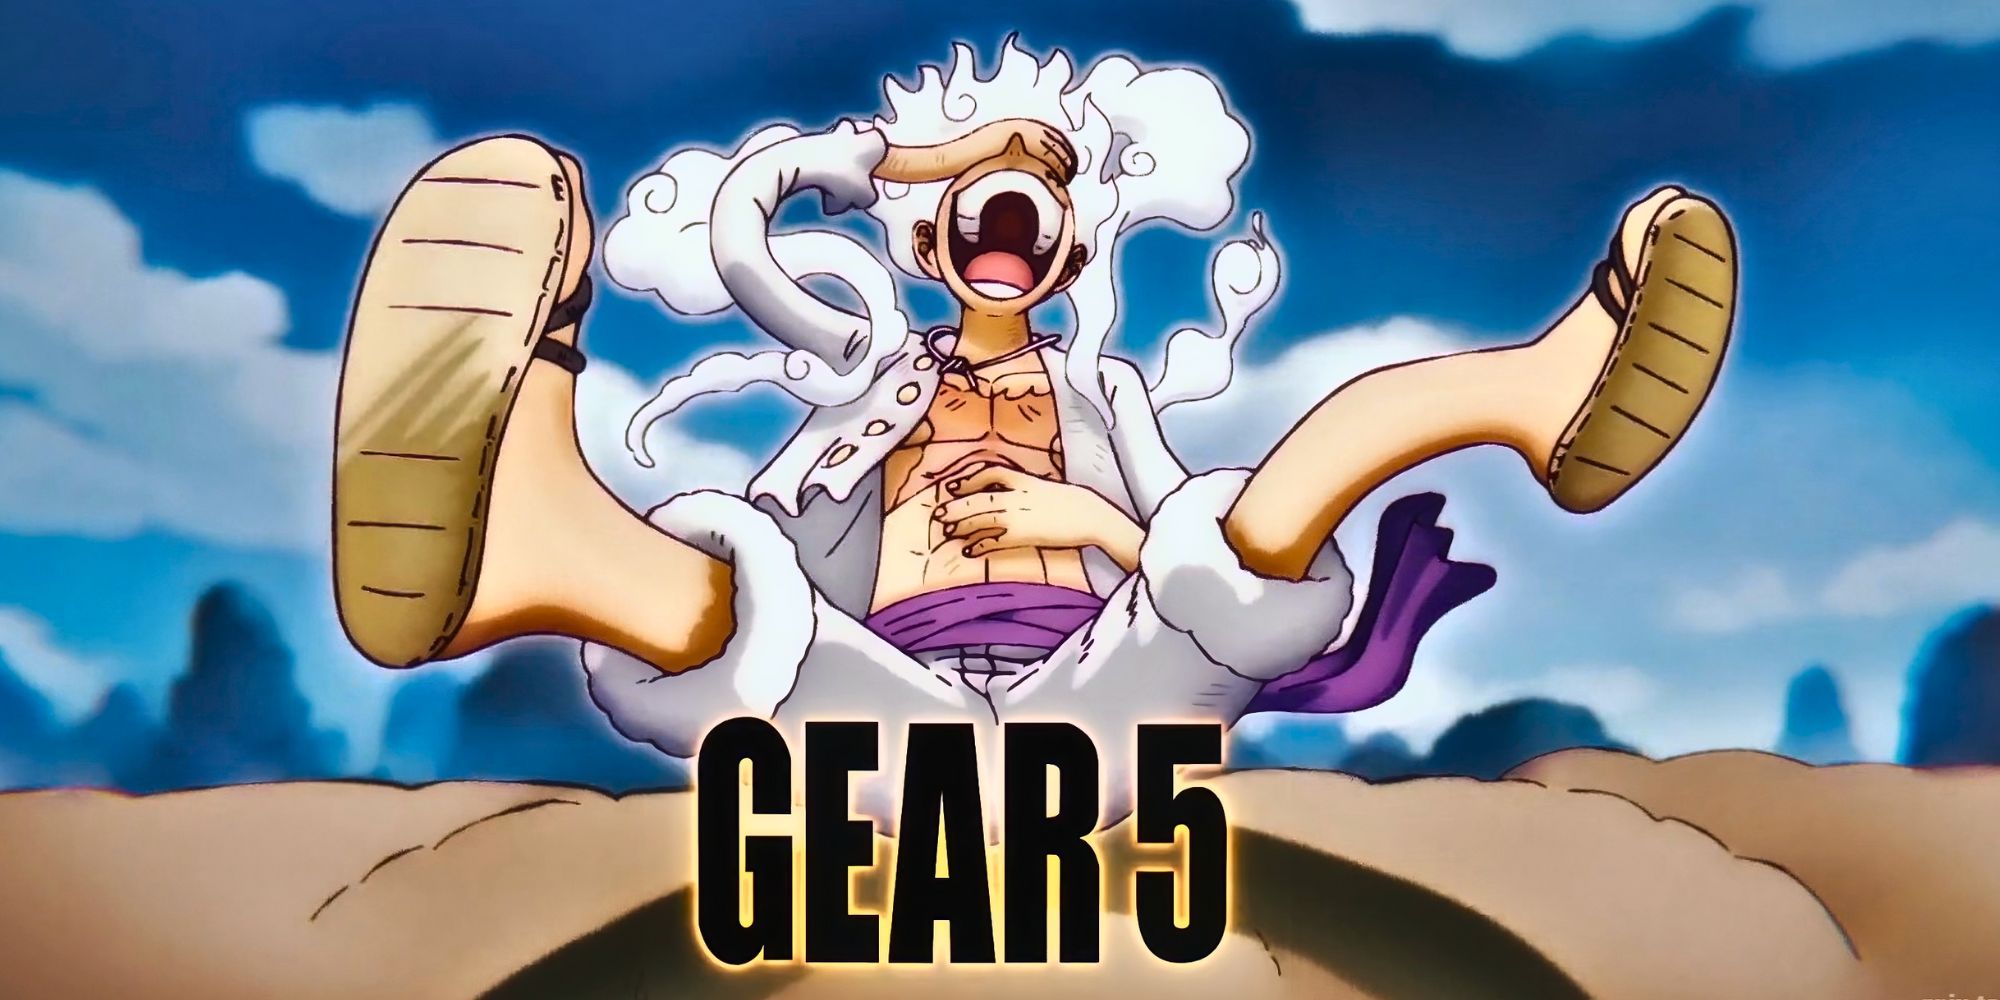 One Piece Gear 5 Explained: What Is Luffy's New Power & Which